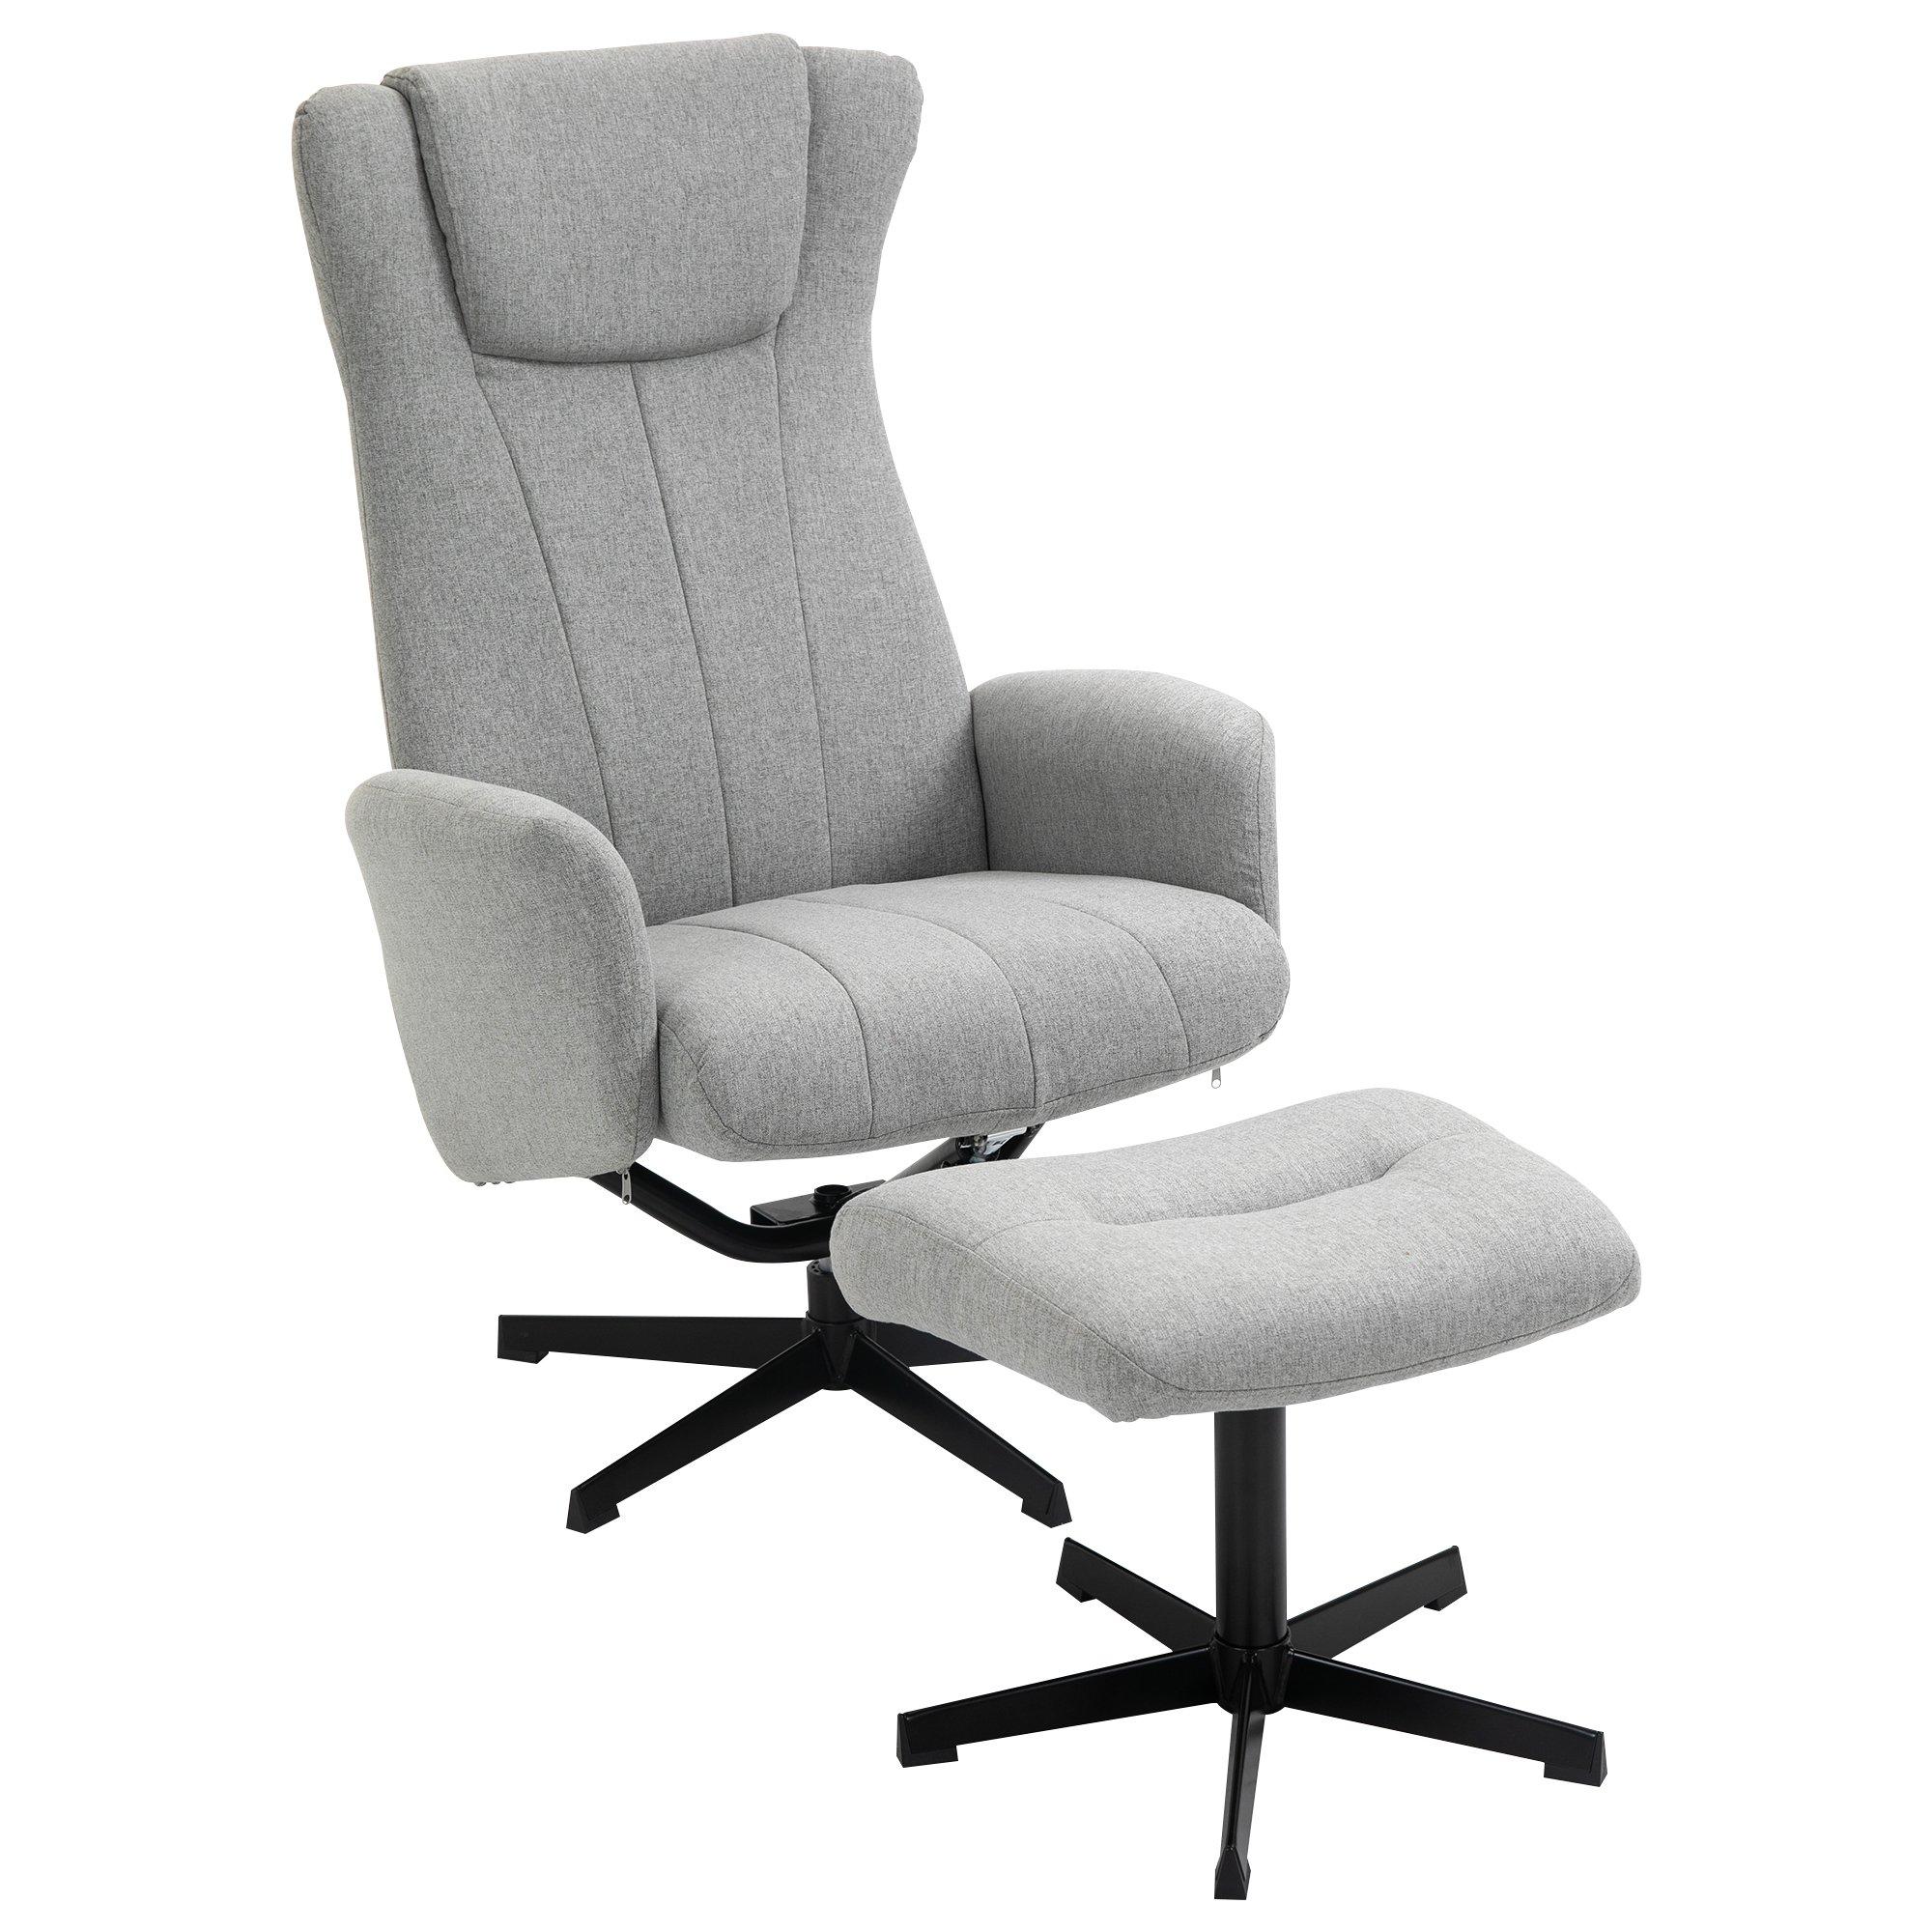 Recliner and Ottoman with 135deg Adjustable Backrest for Home Office